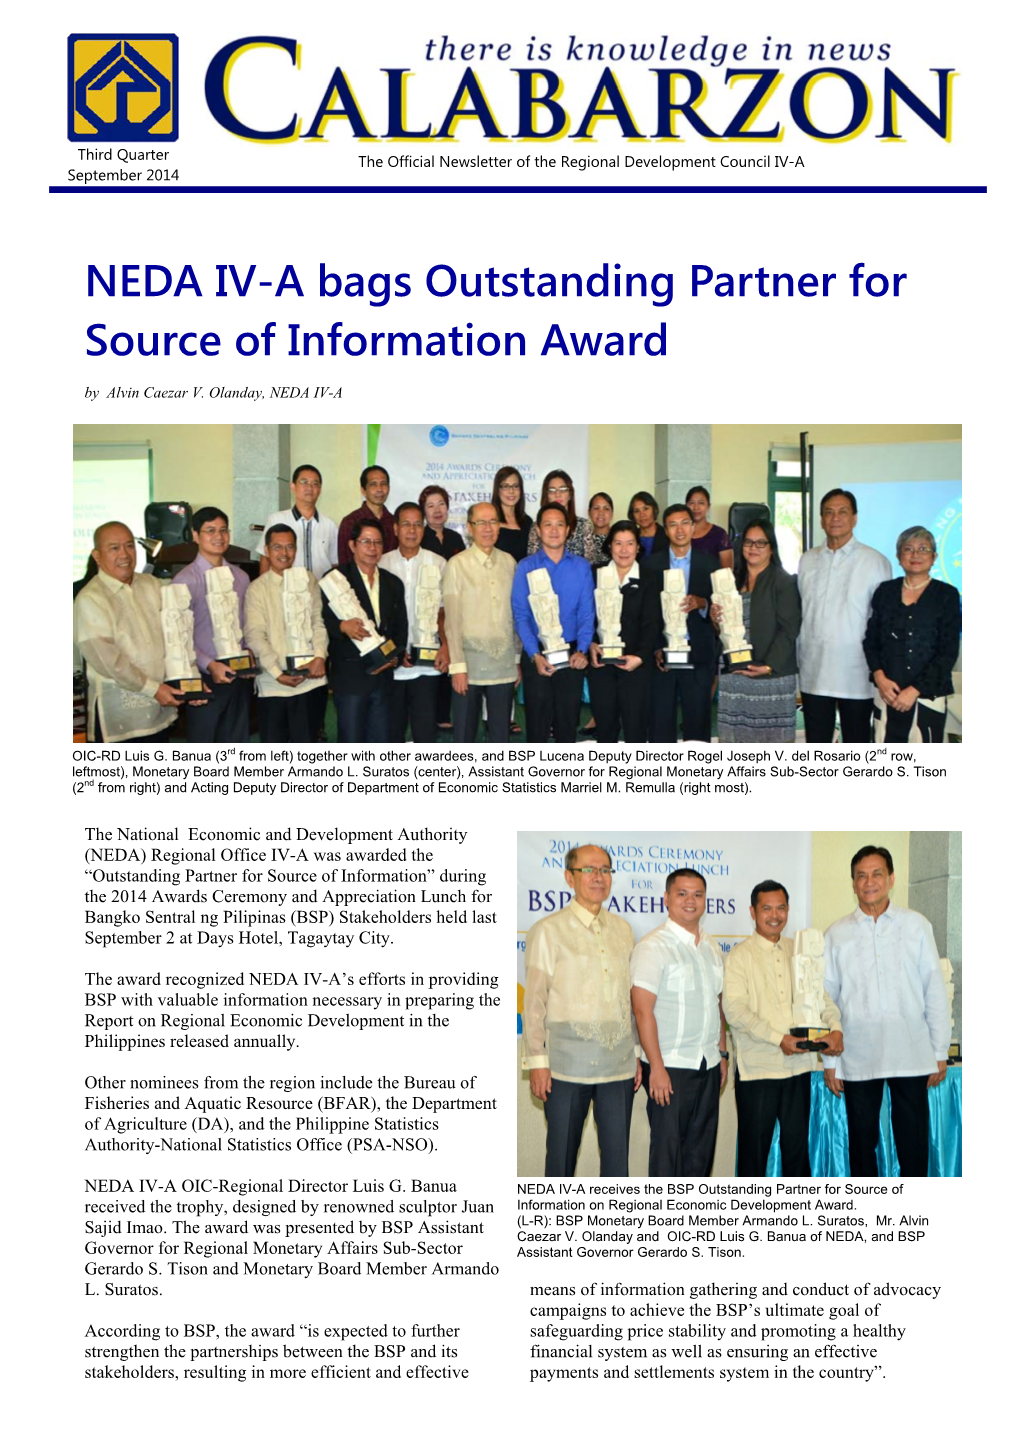 NEDA IV-A Bags Outstanding Partner for Source of Information Award